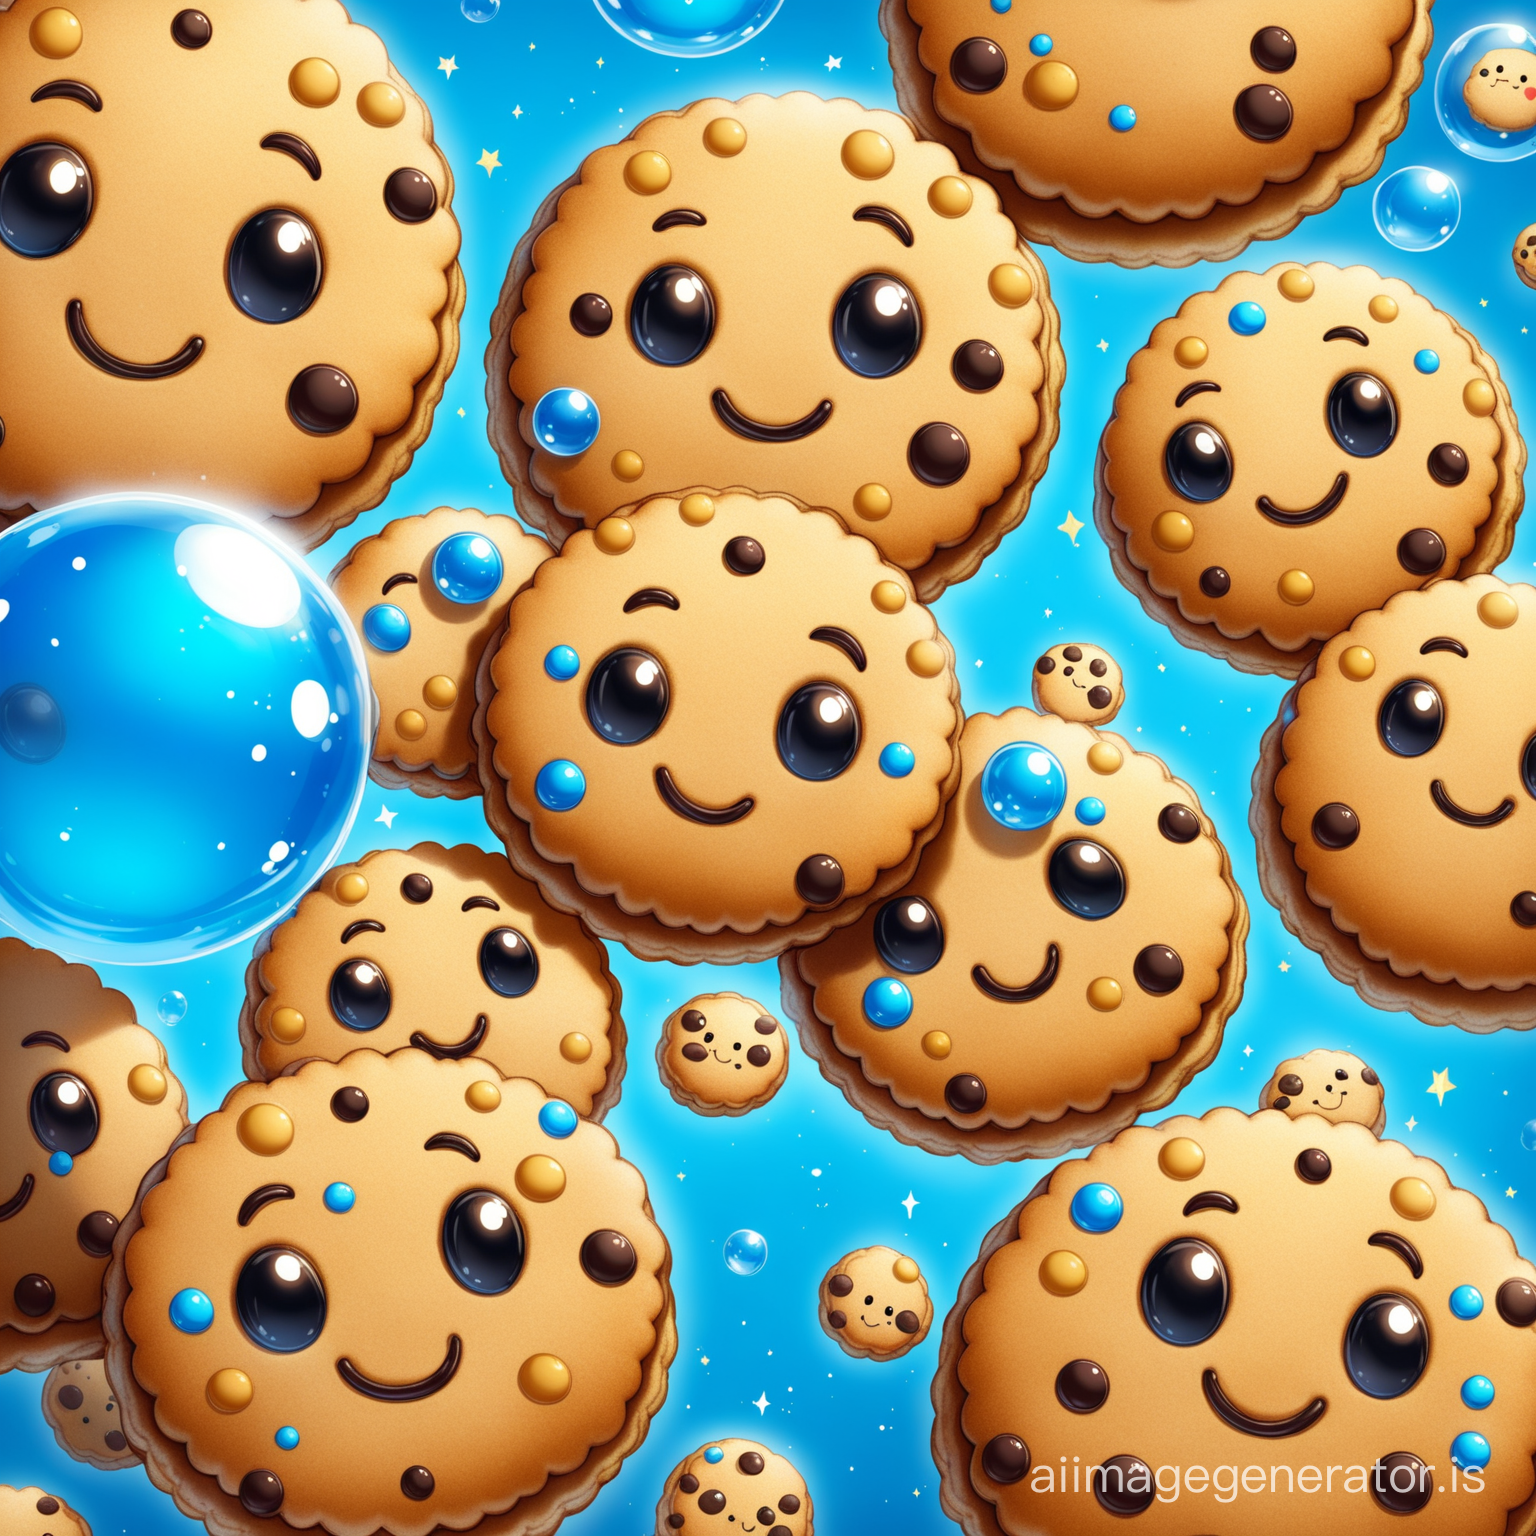 A little black happy cute cookie with green eye and smile flying on the cookie jungle with super detail and High Quality
big and blue Bubble and floating cookie are seen everywhere
Details are evident beautifully and with great precision